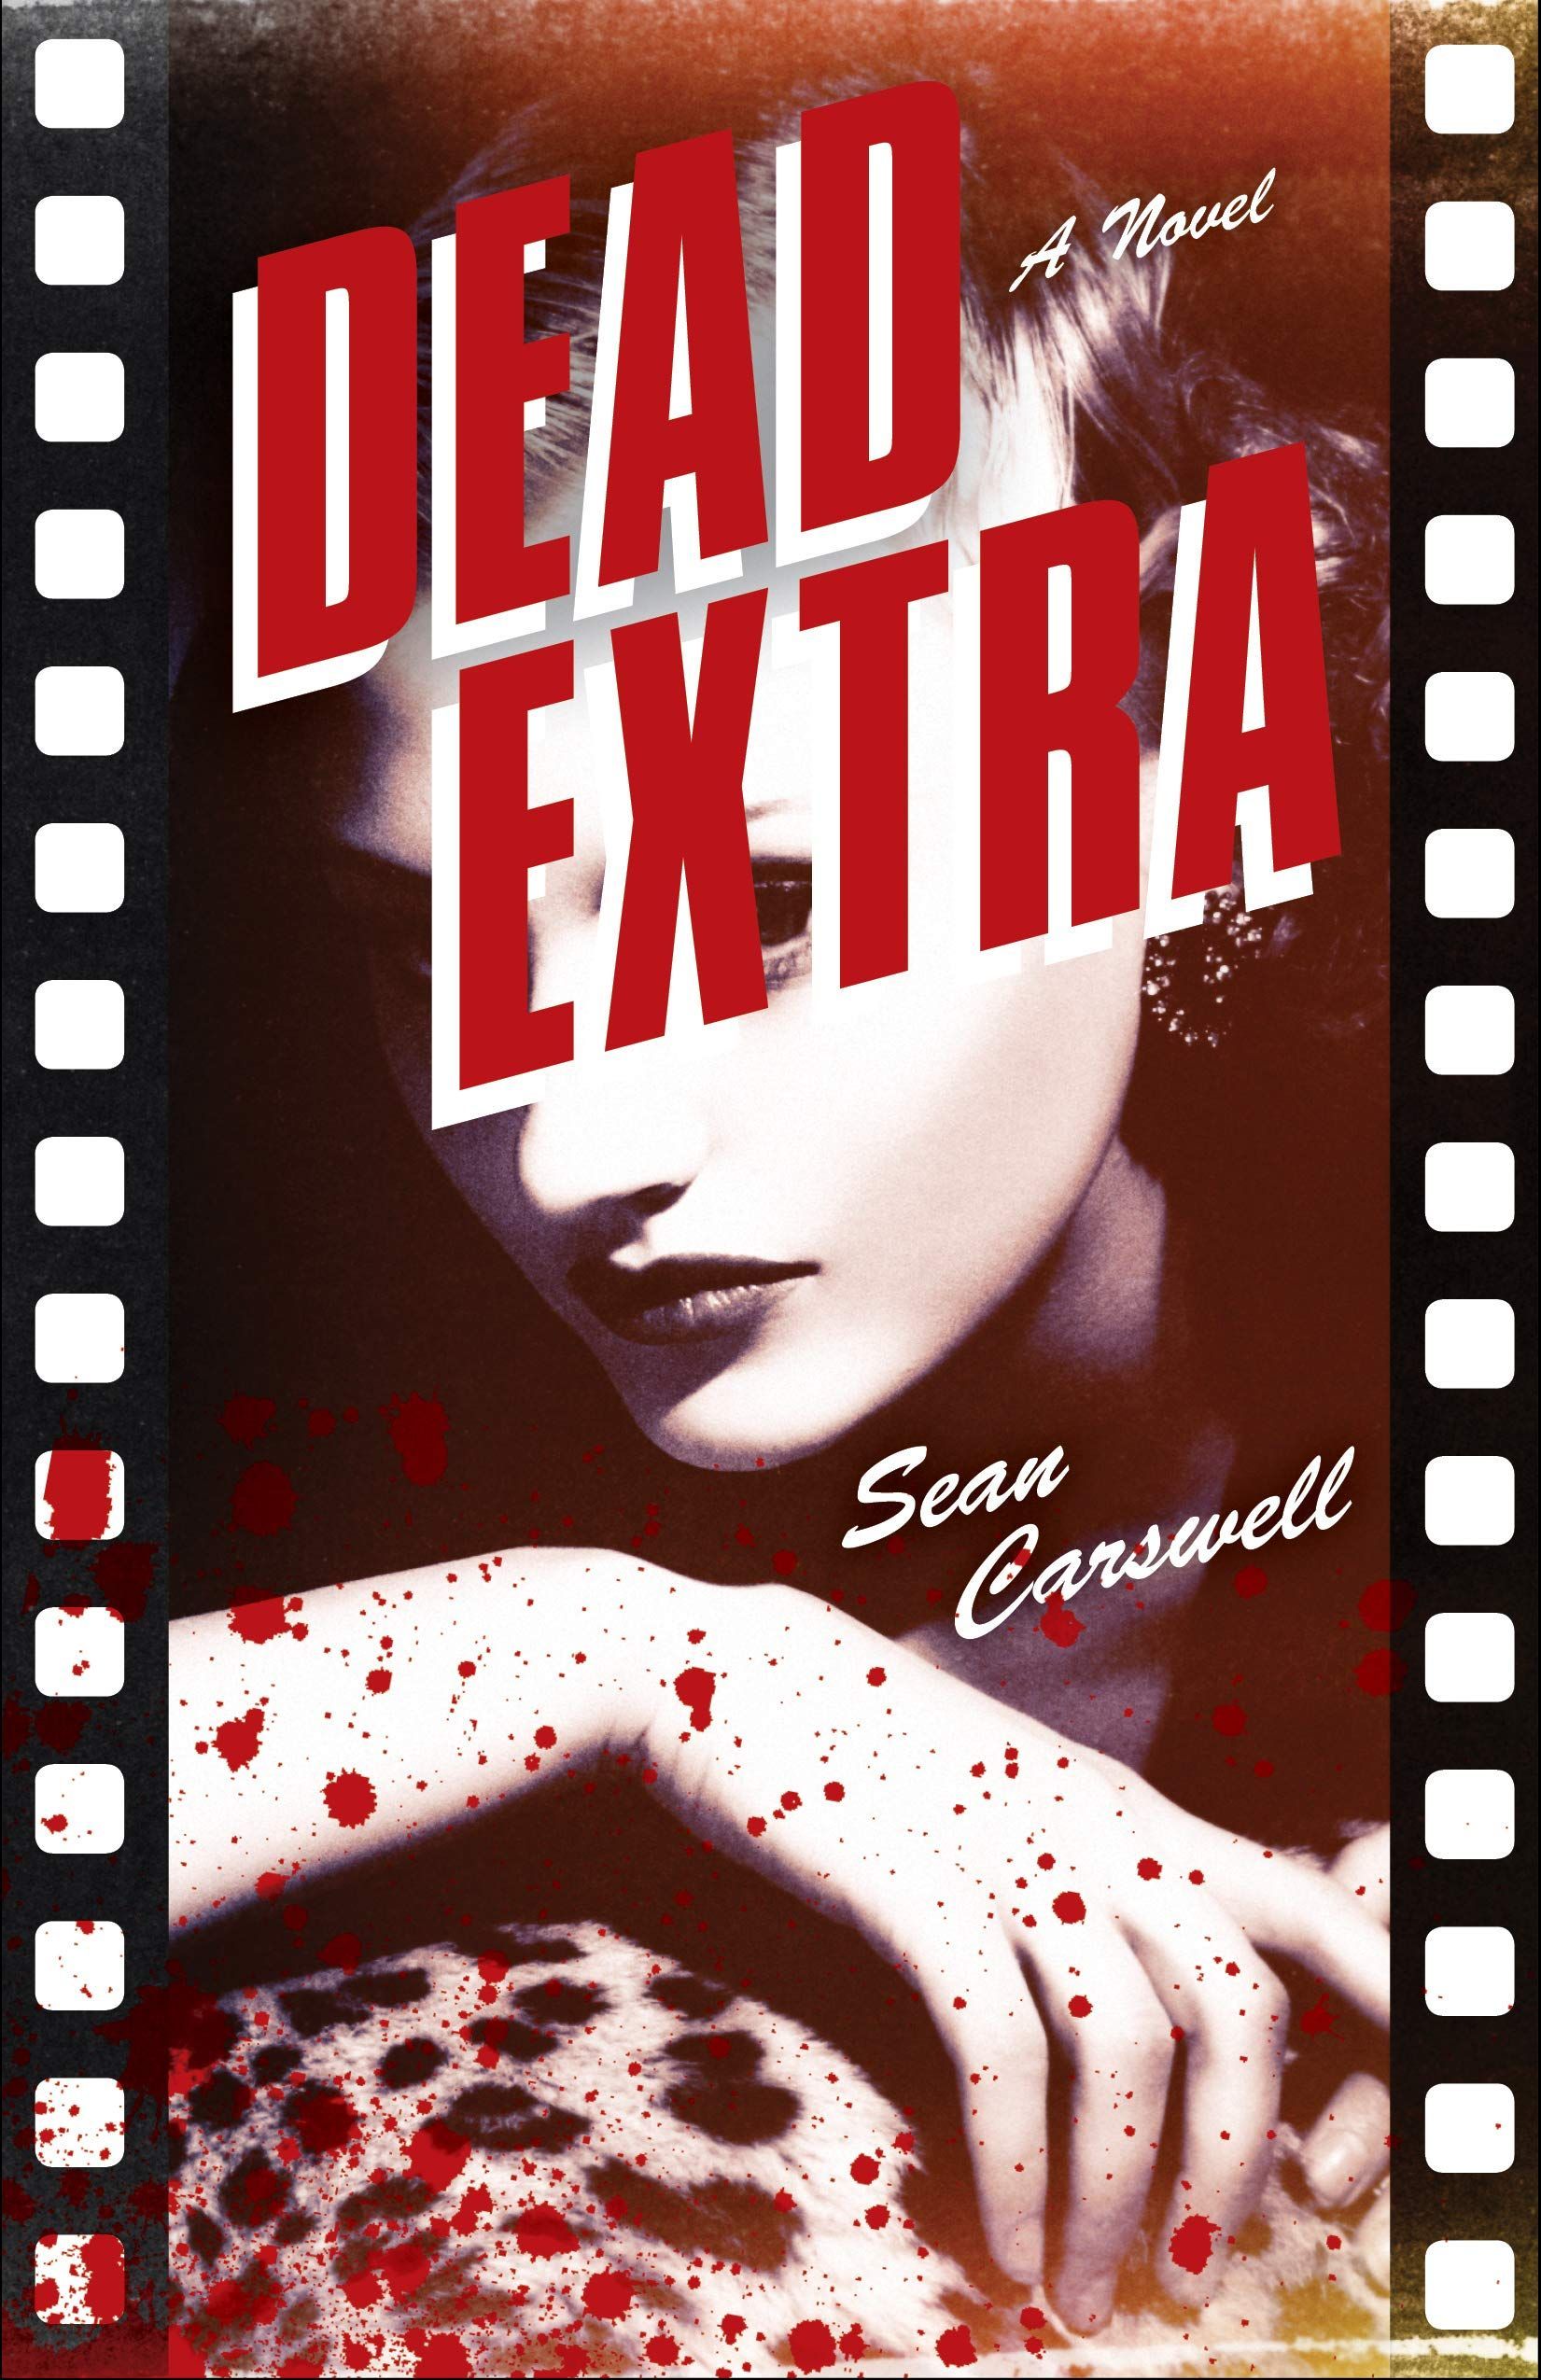 Other Scripts Within the Story: On Sean Carswell’s “Dead Extra”